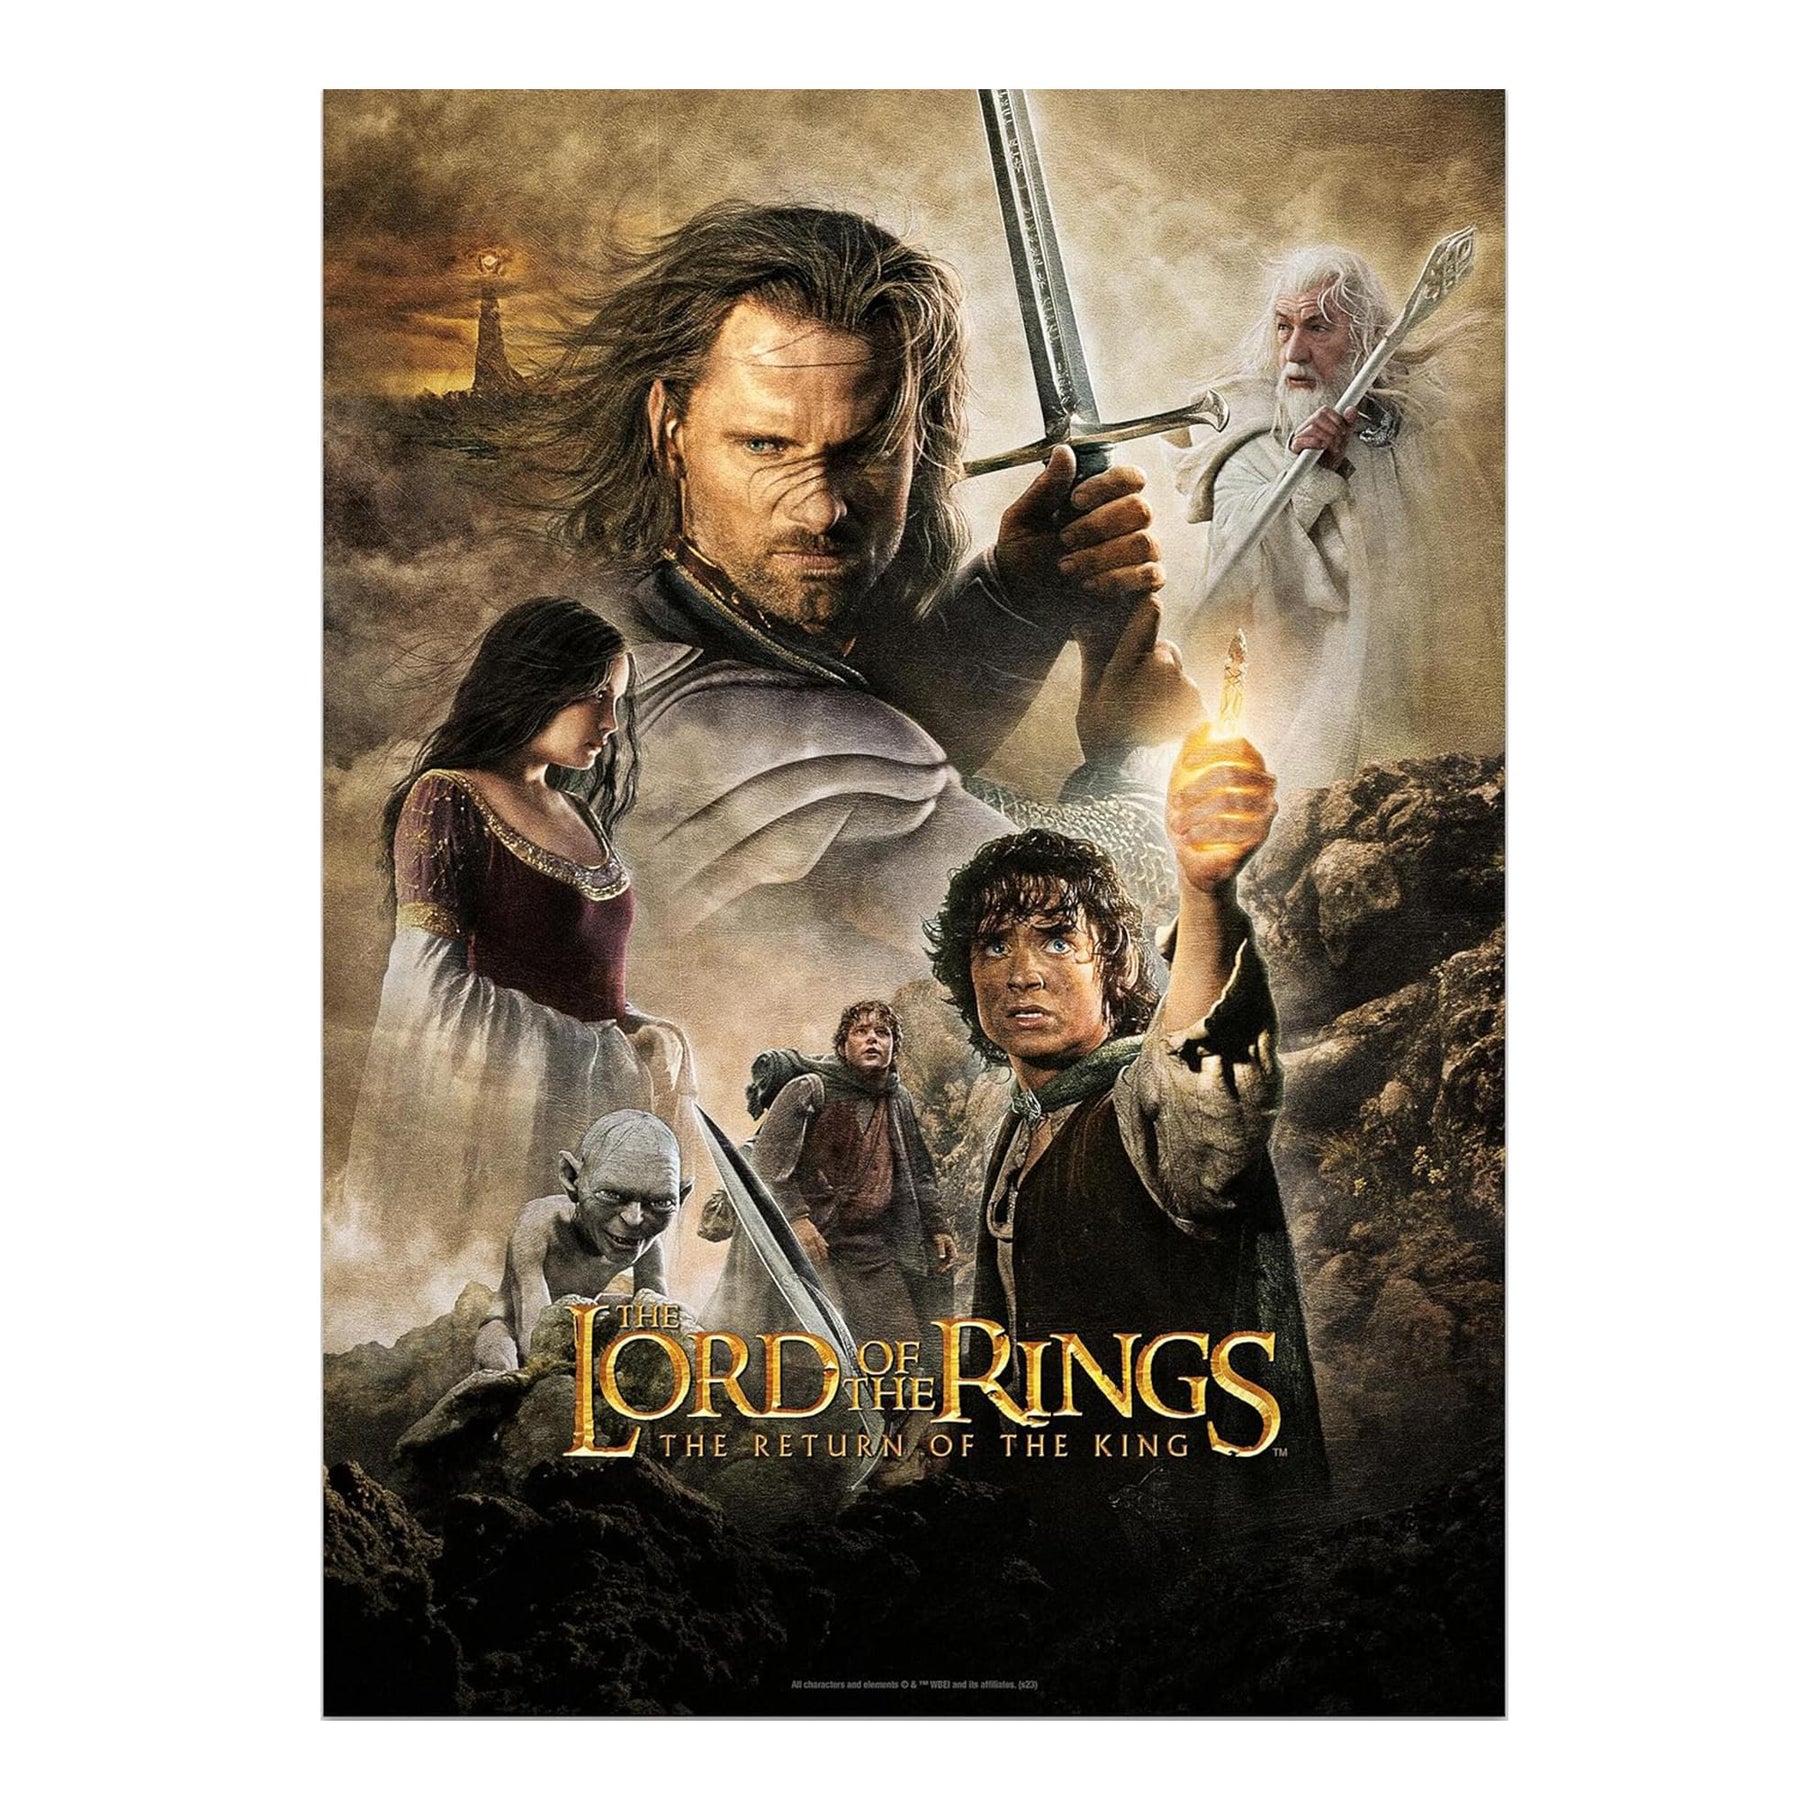 Lord of The Rings: Return of the King 300 Piece VHS Jigsaw Puzzle